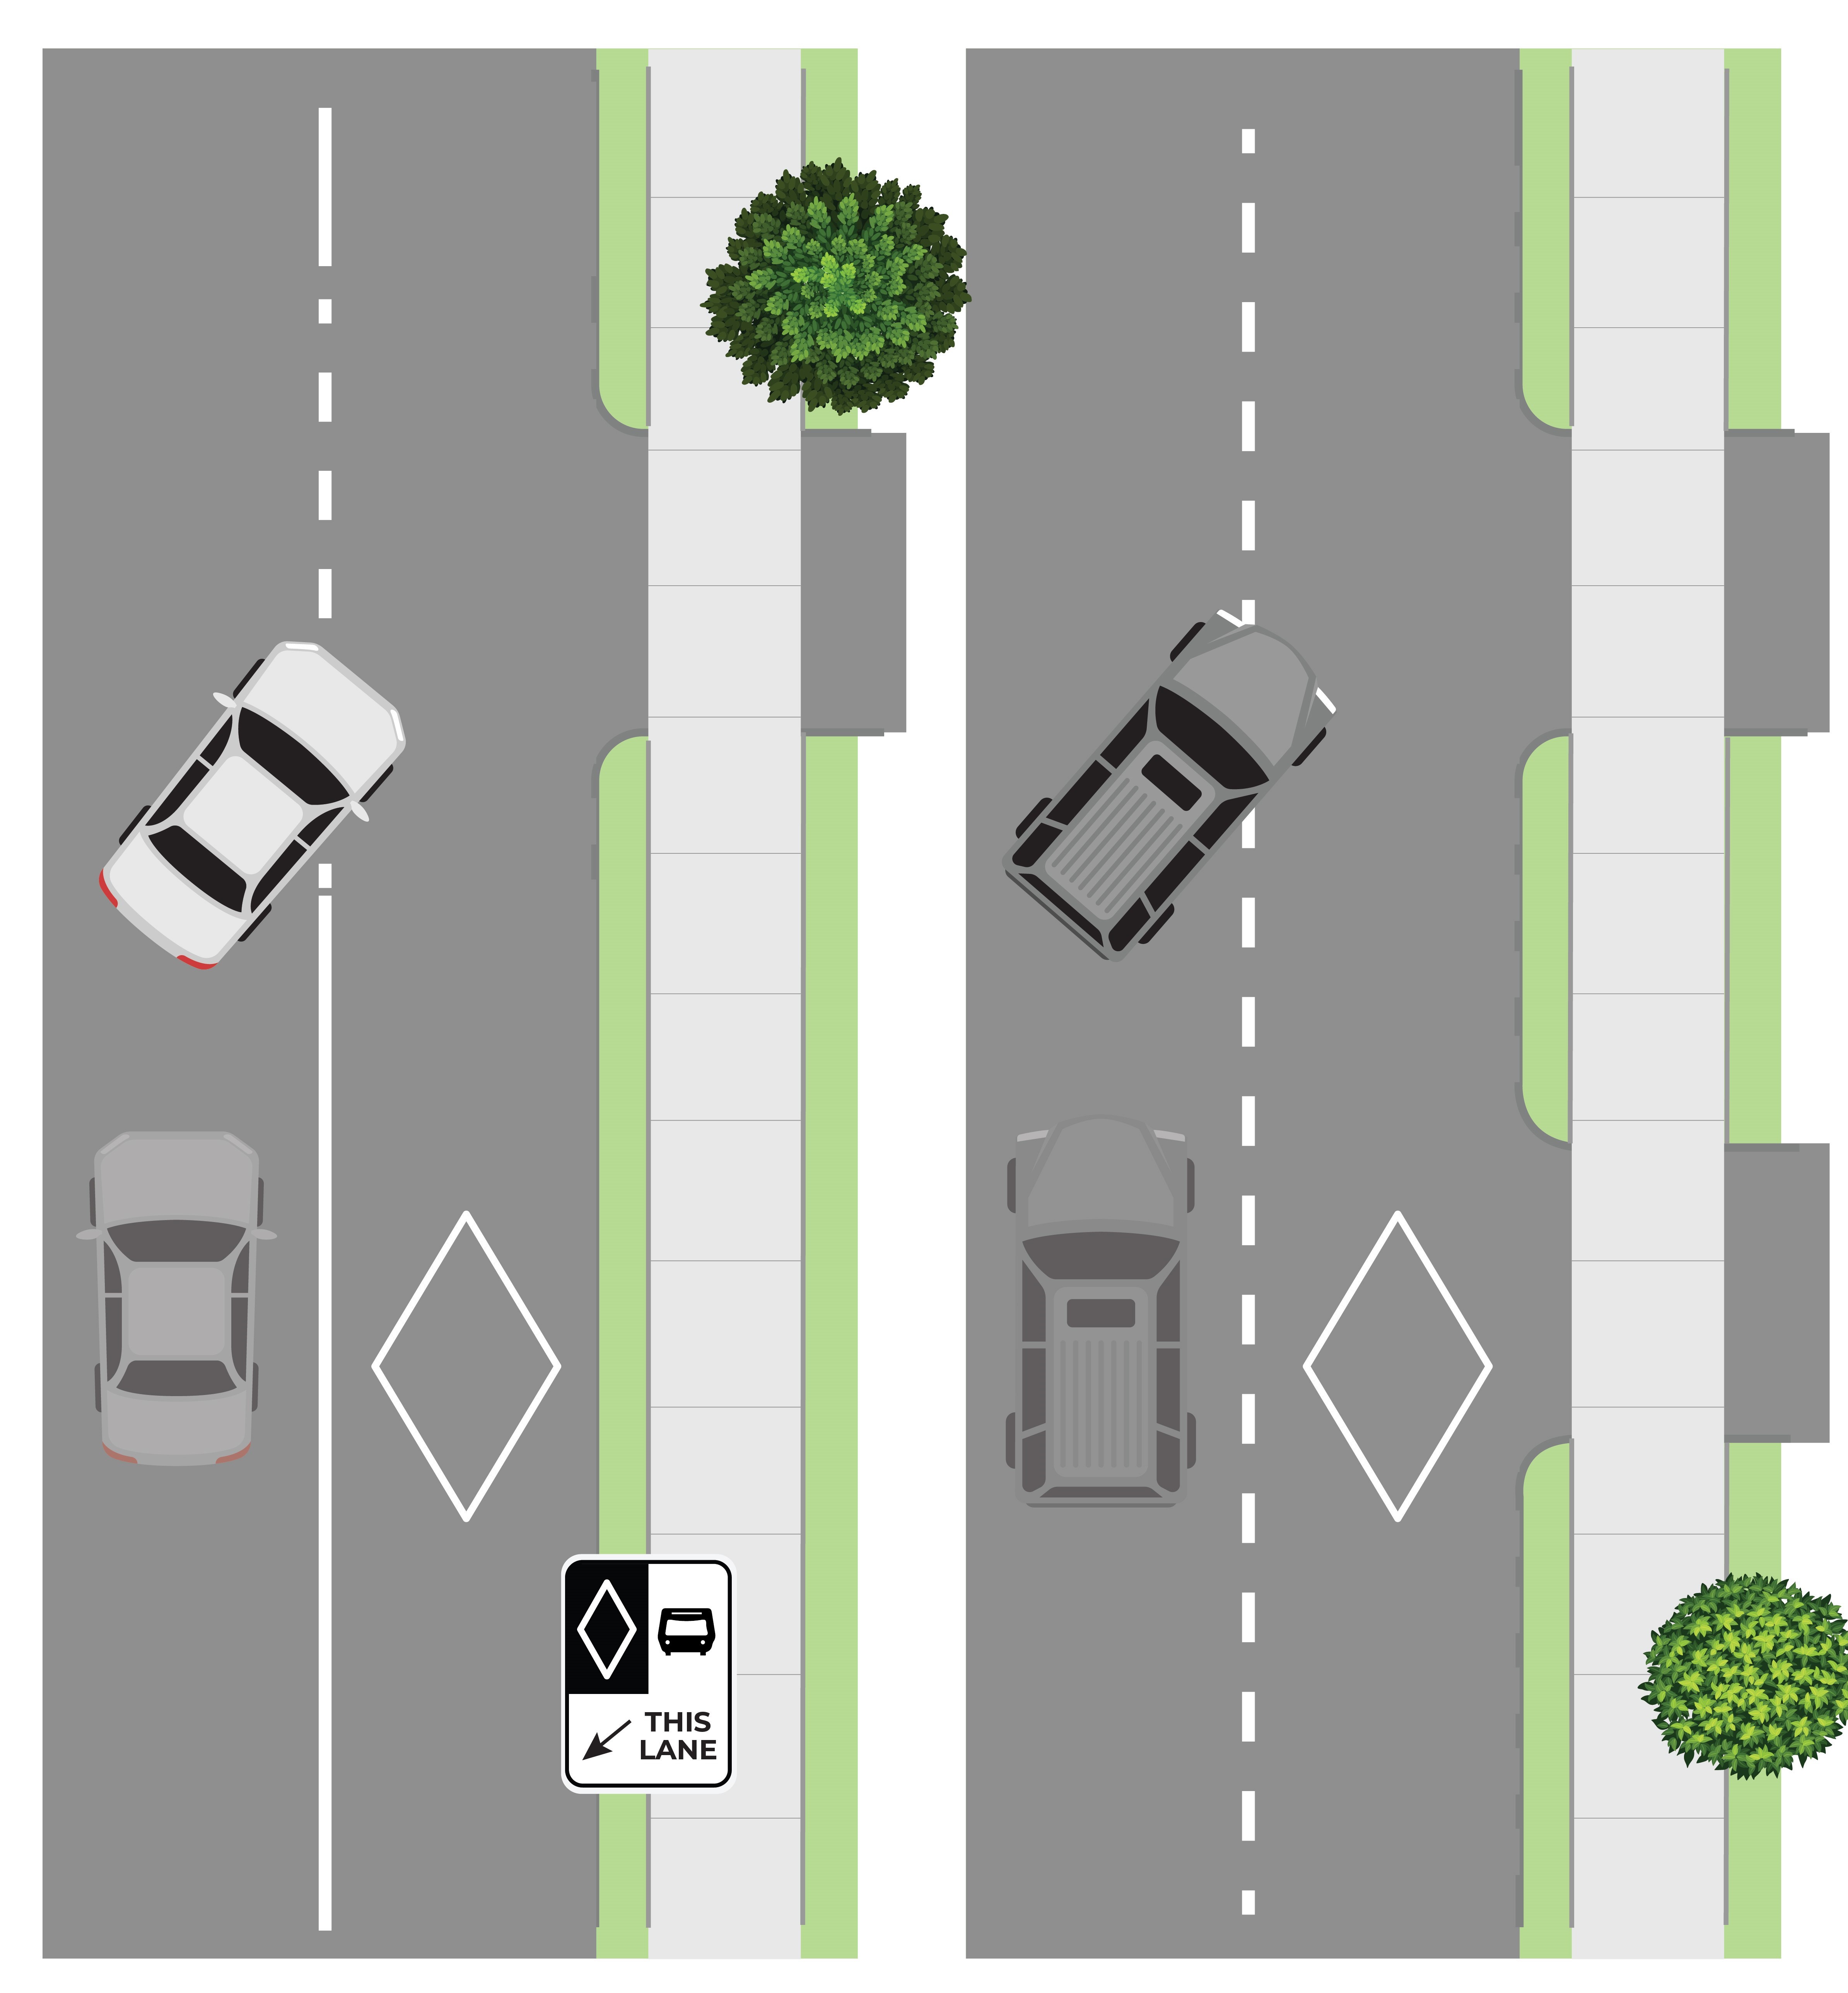 This graphic shows how to cross the bus lane for entrance access/egress, or to enter dedicated right turn lane. 